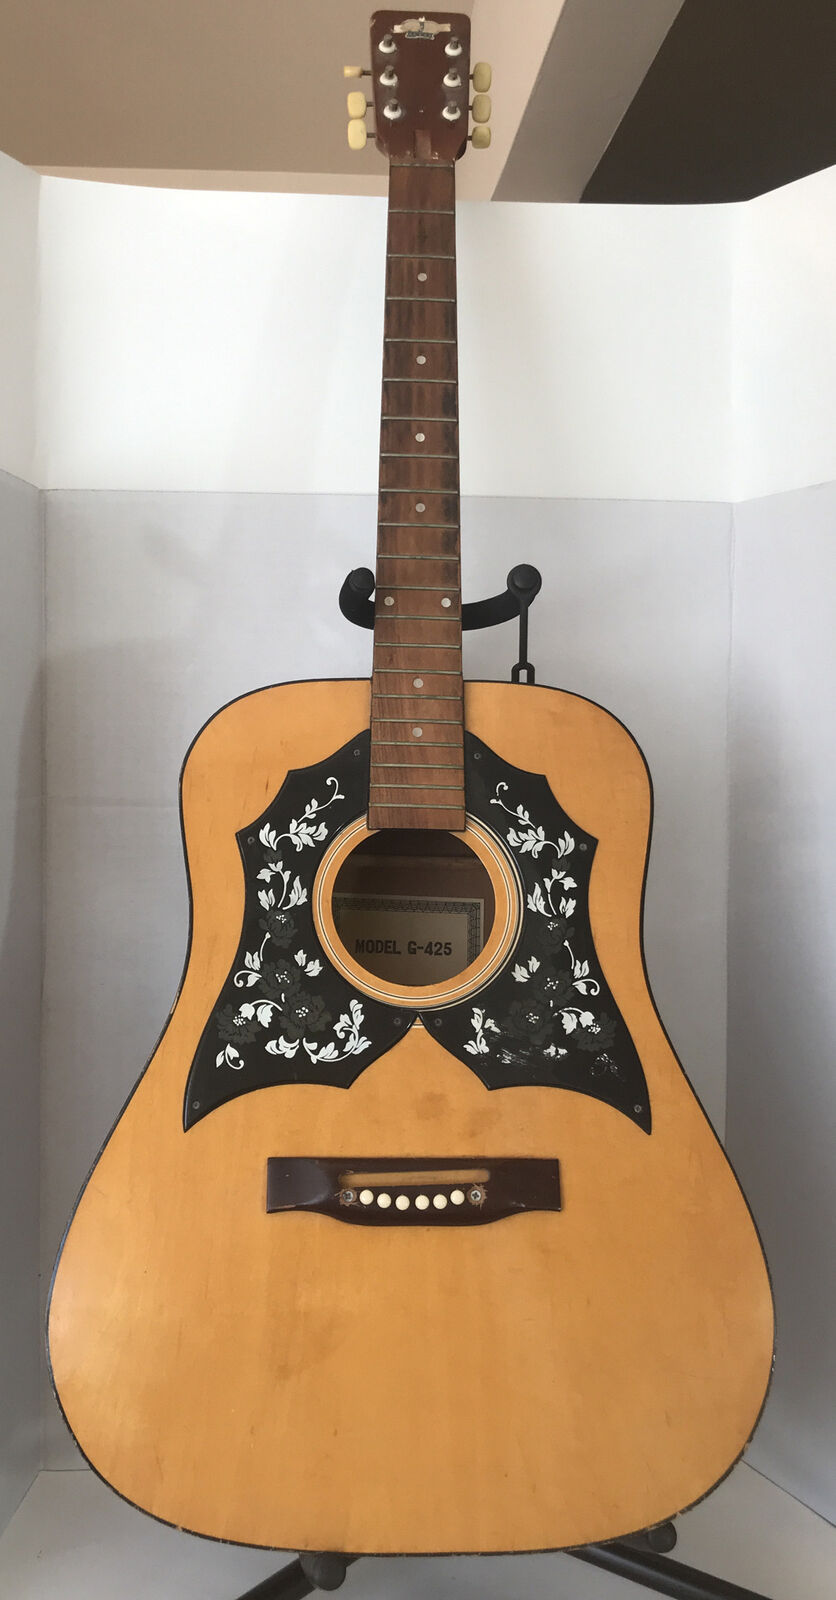 Vintage Checkmate Acoustic Guitar Model G-425 (Ovation Style Body)